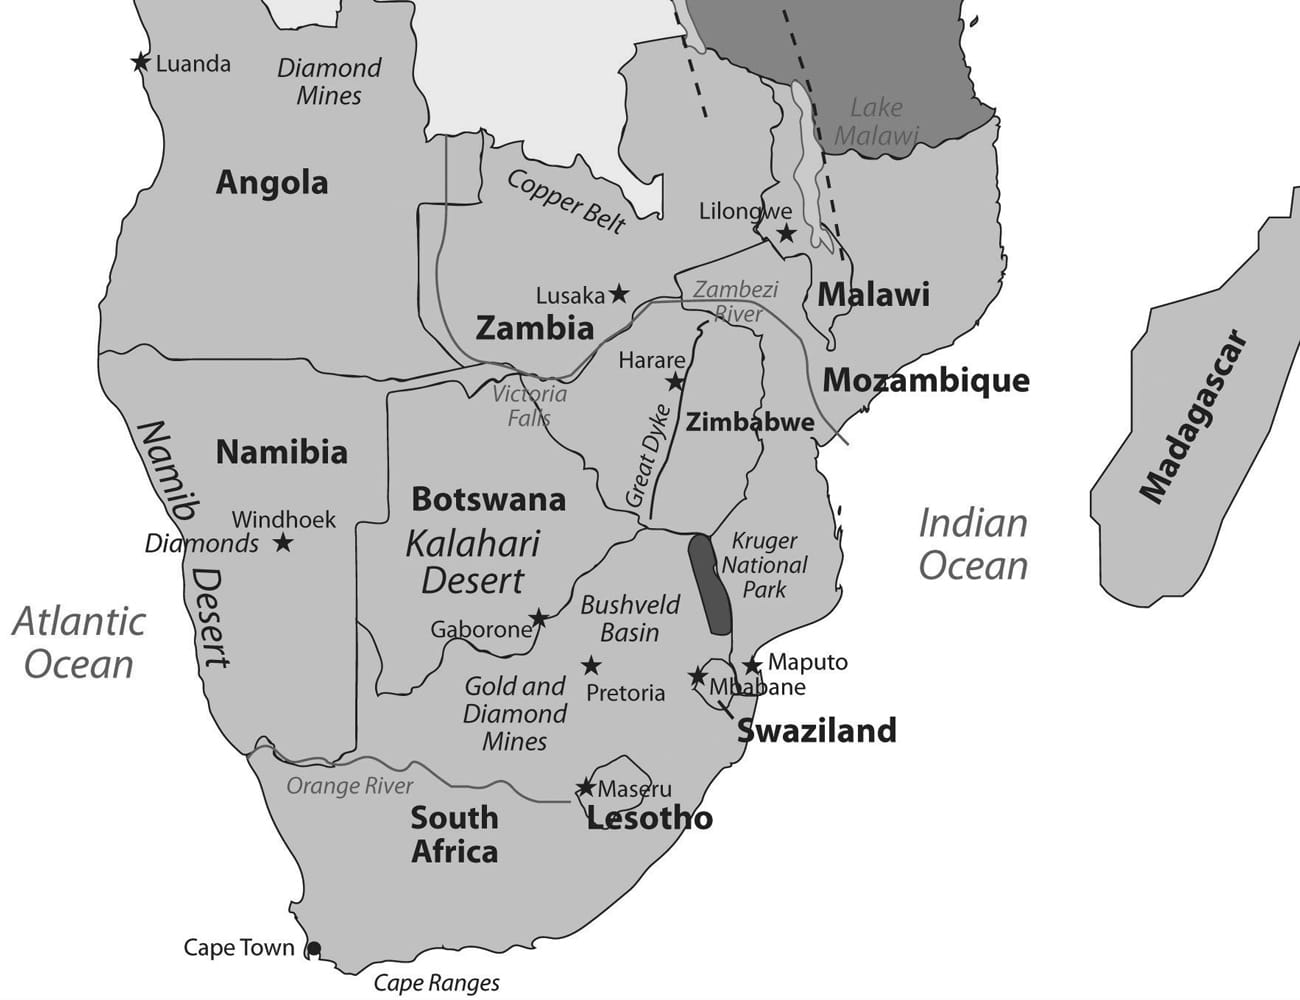 A Map Showing Countries in Southern African Region